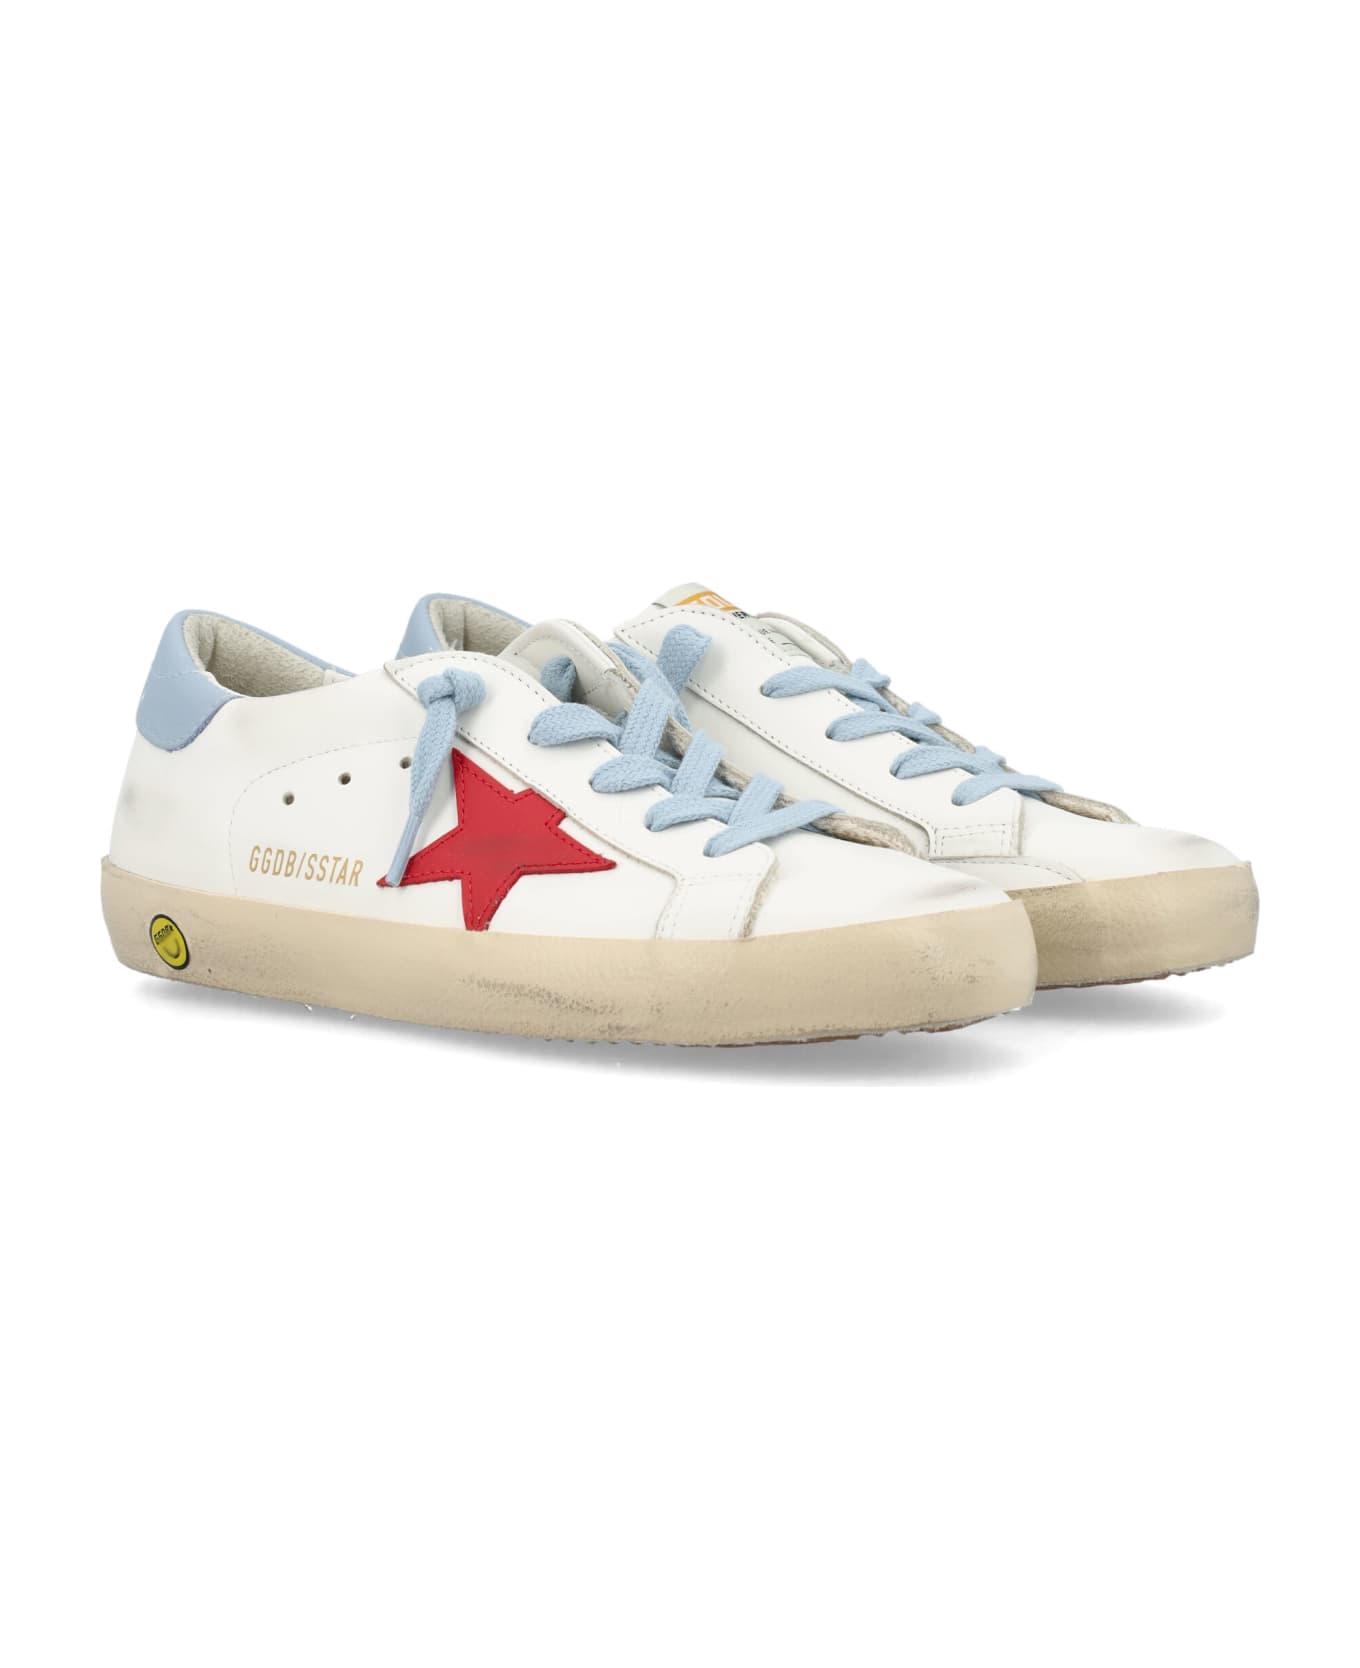 Golden Goose Super Star Sneakers - WHITE/RED/BLUE